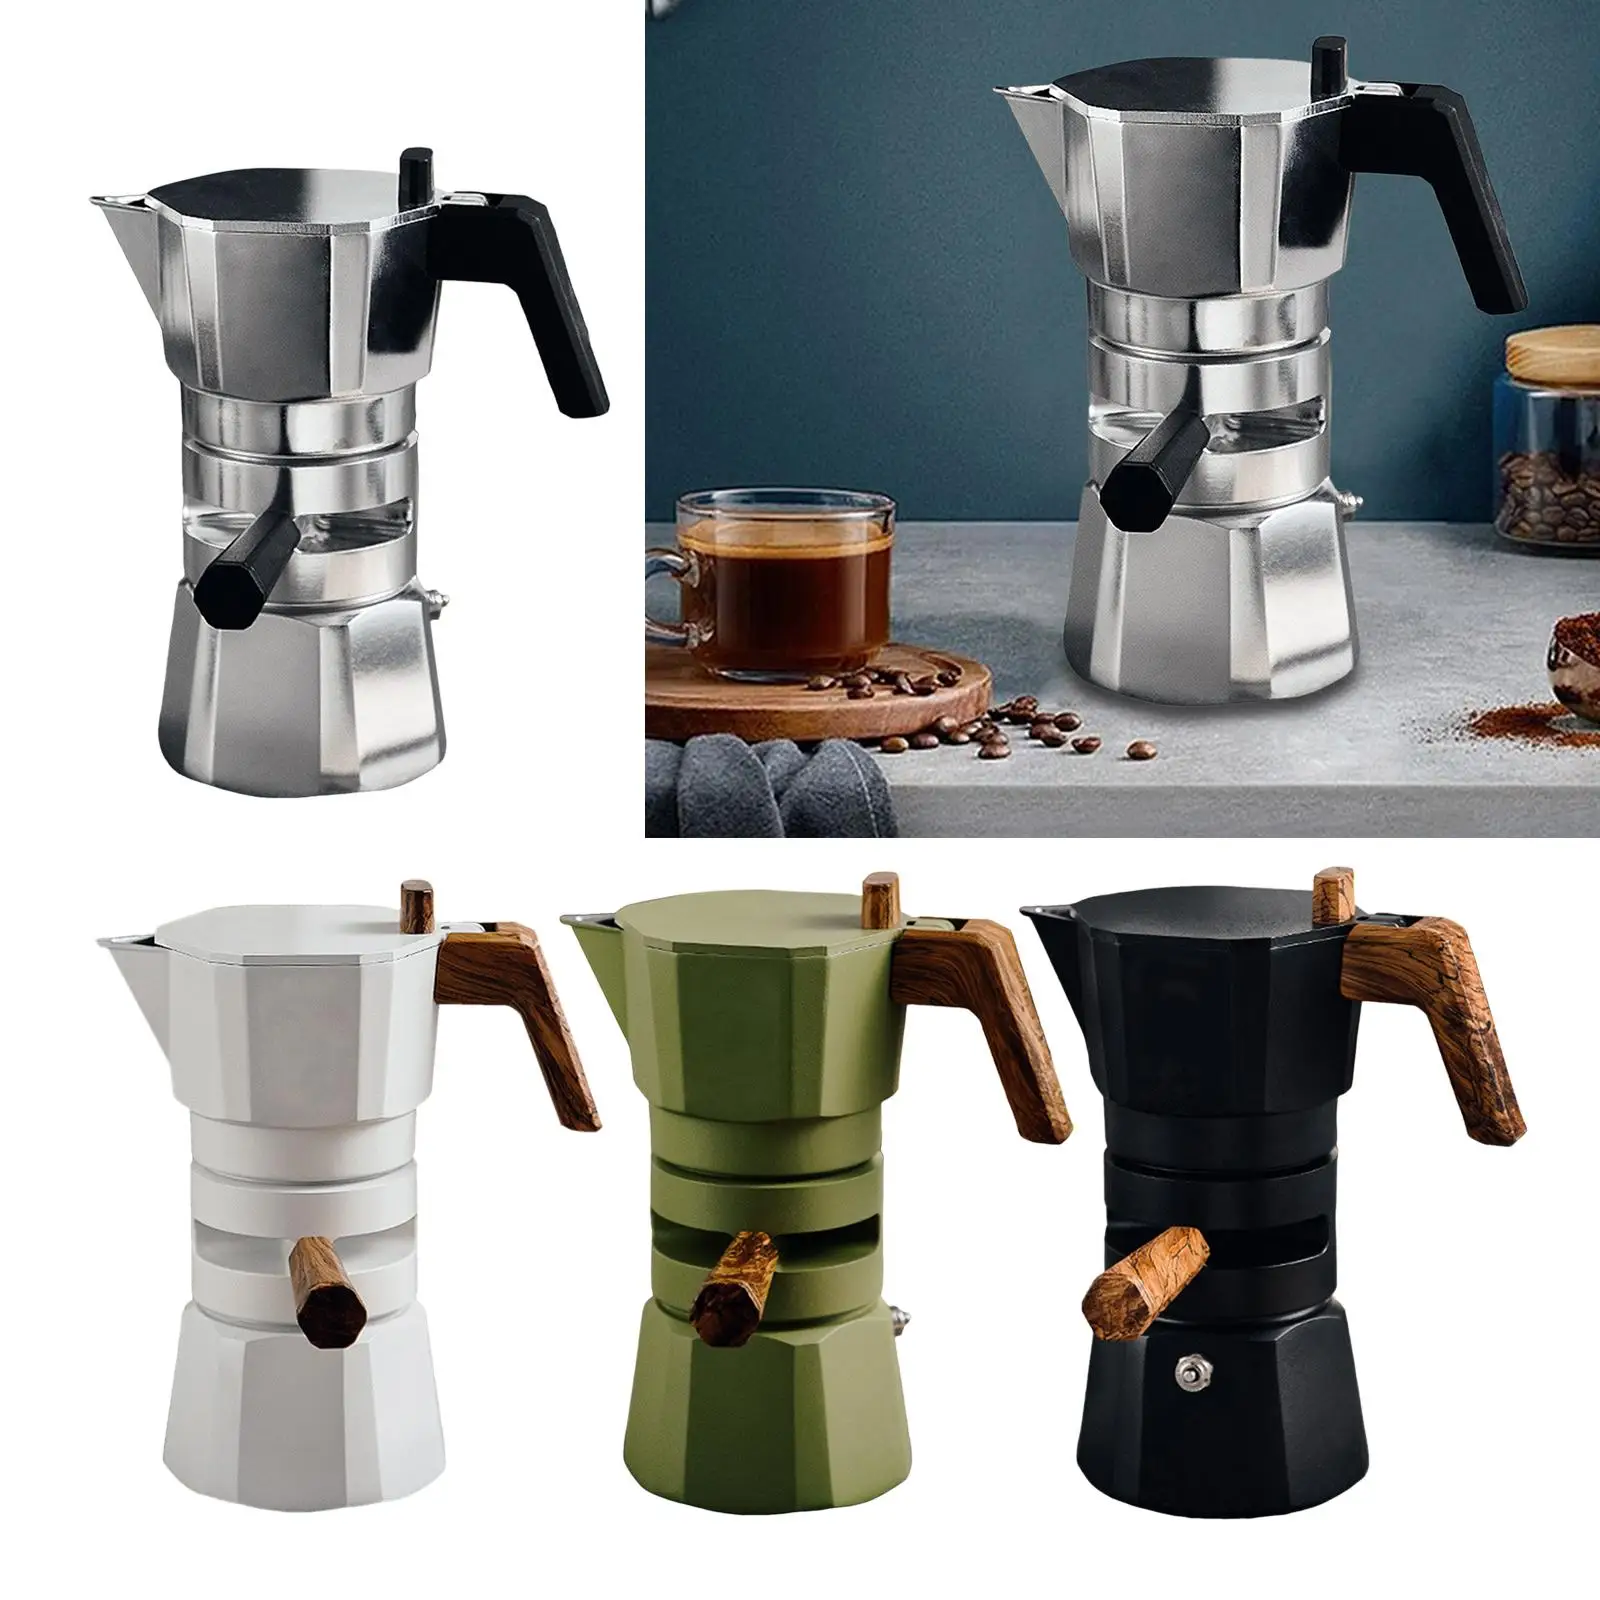 Coffee Maker Pot Makes Delicious Coffee Durable Coffee Machine Easy to Use Coffee Maker for Office Kitchen Travel Home